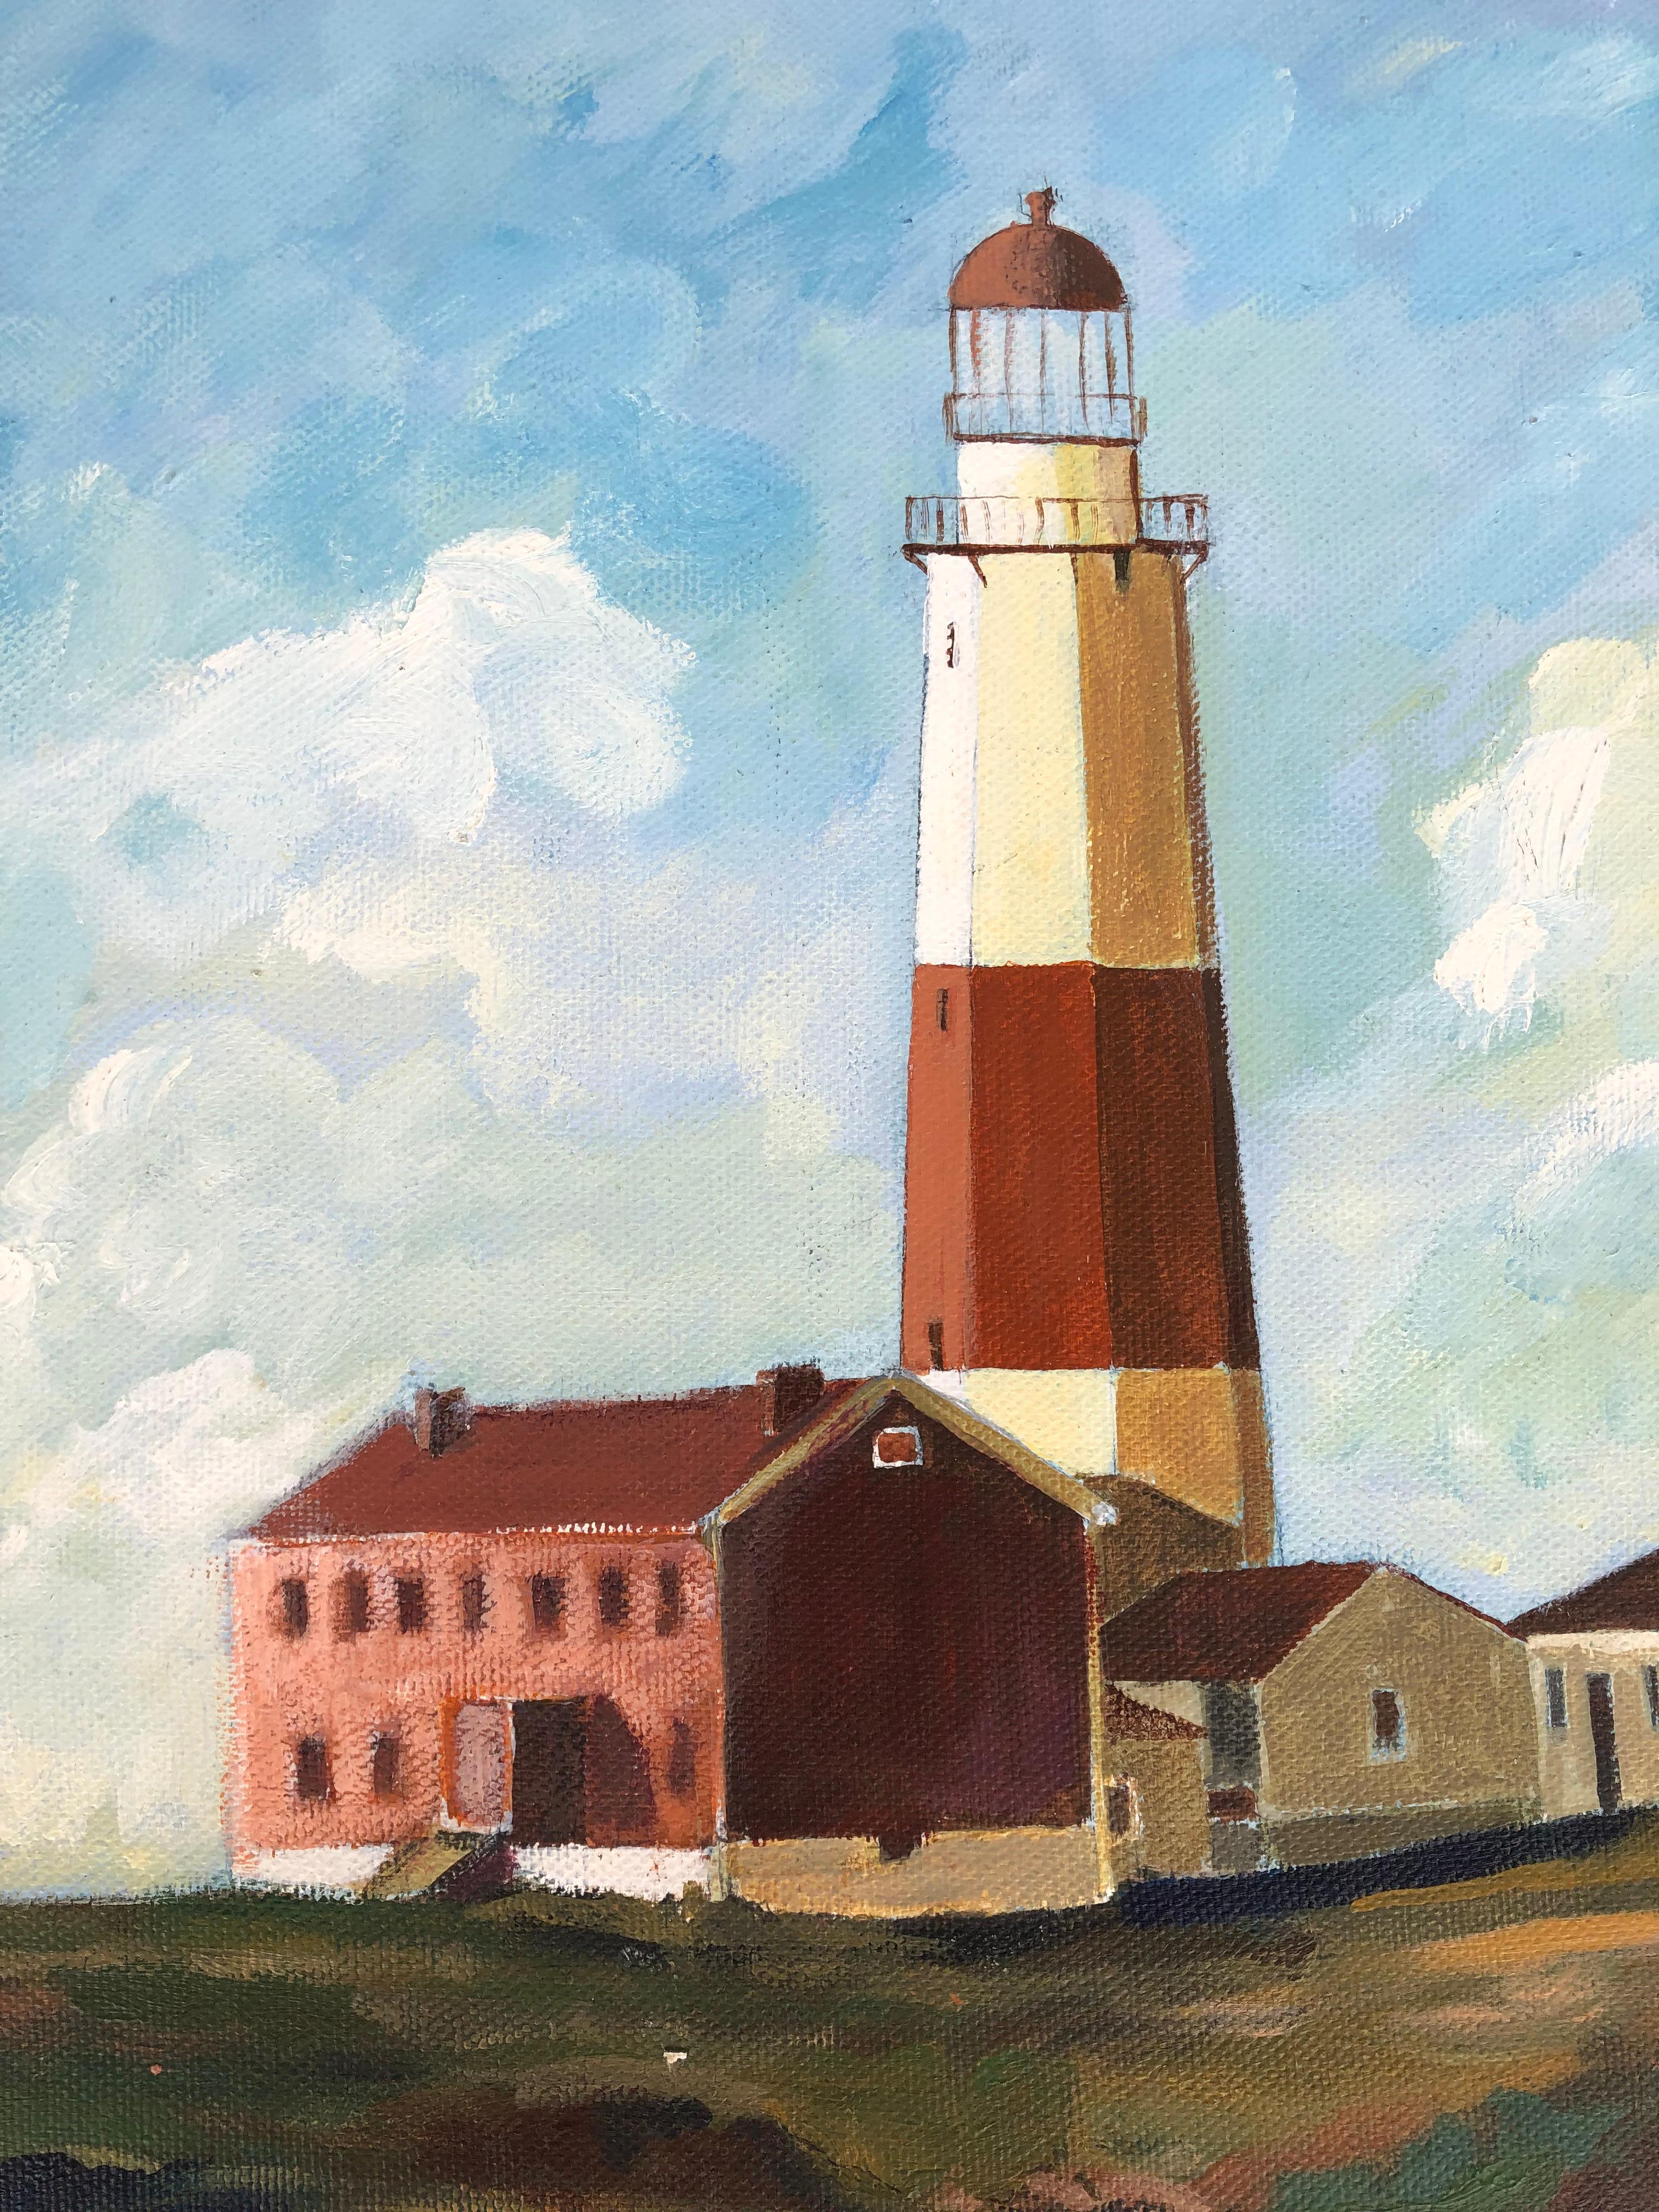 Jose Maria Ansalone Montauk point lighthouse painting on canvas, 2007

Offered for sale is a painting on canvas of the lighthouse at Montauk Point, Long Island, N.Y. by the renowned Argentine artist Jose Mario Ansalone. The work is unstretched